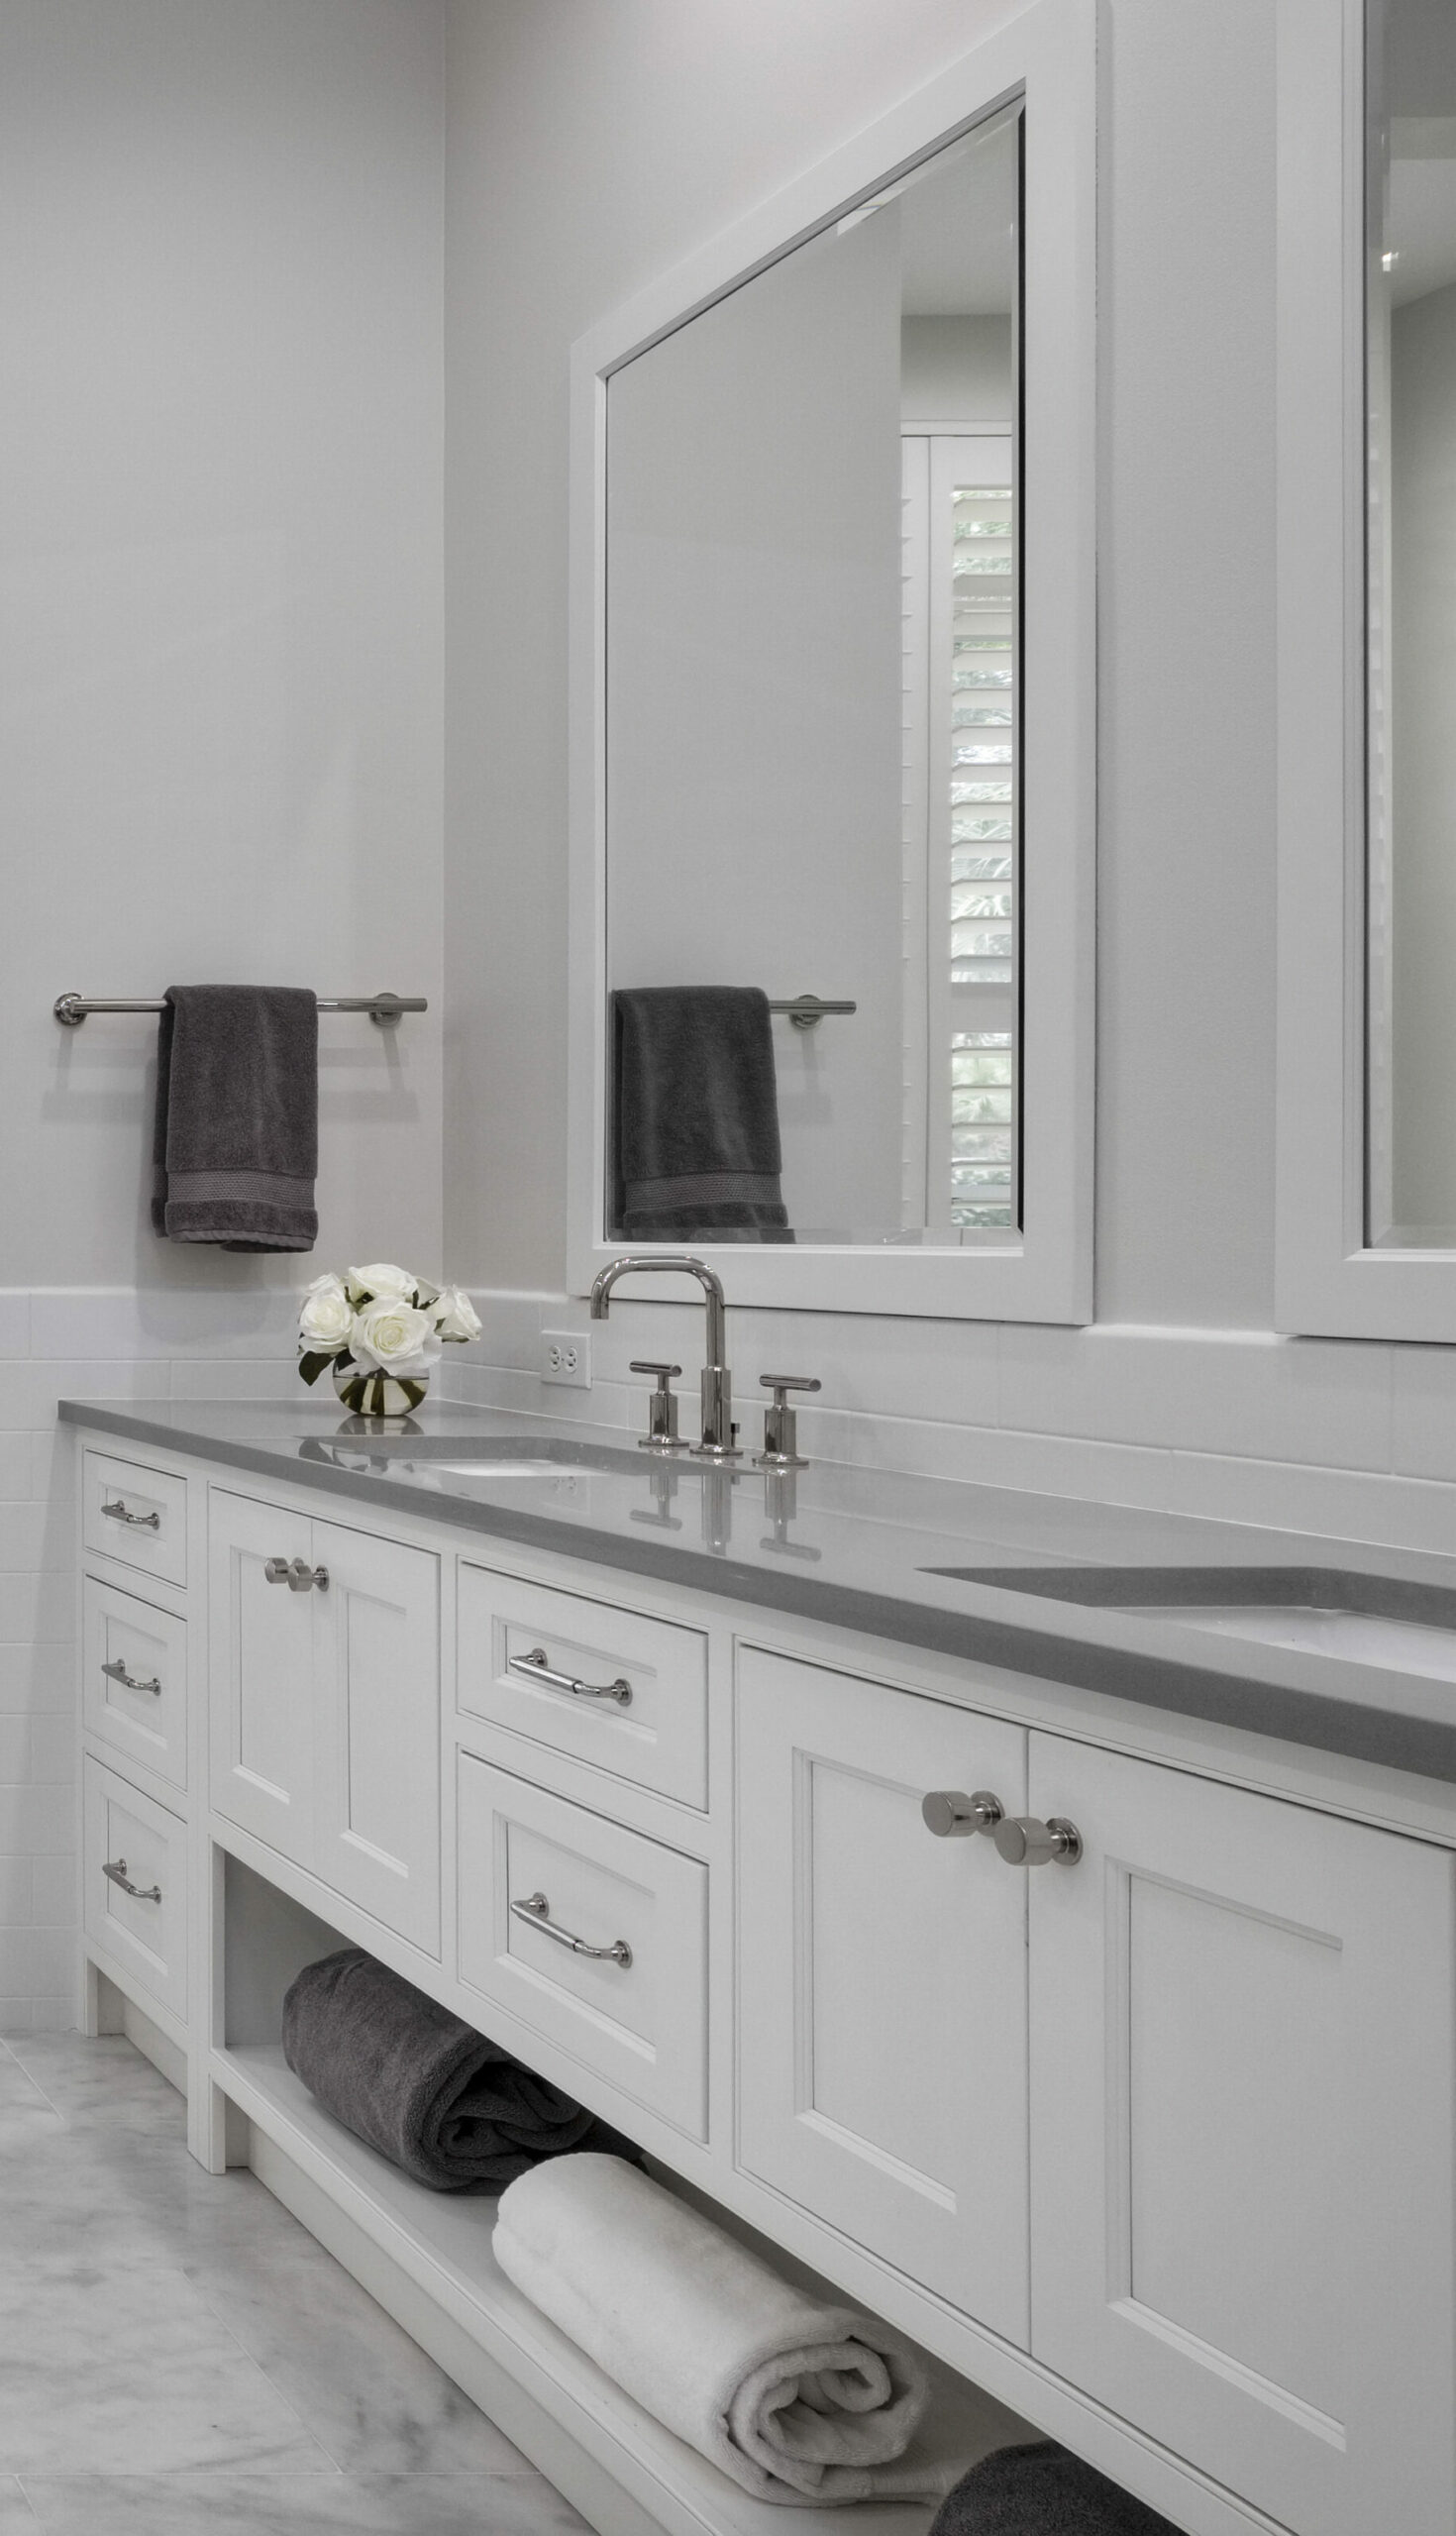 Semi-custom white inset bathroom cabinets. There is stainless steel hardware on the cabinets. The walls are white and the mirror frames are also white.